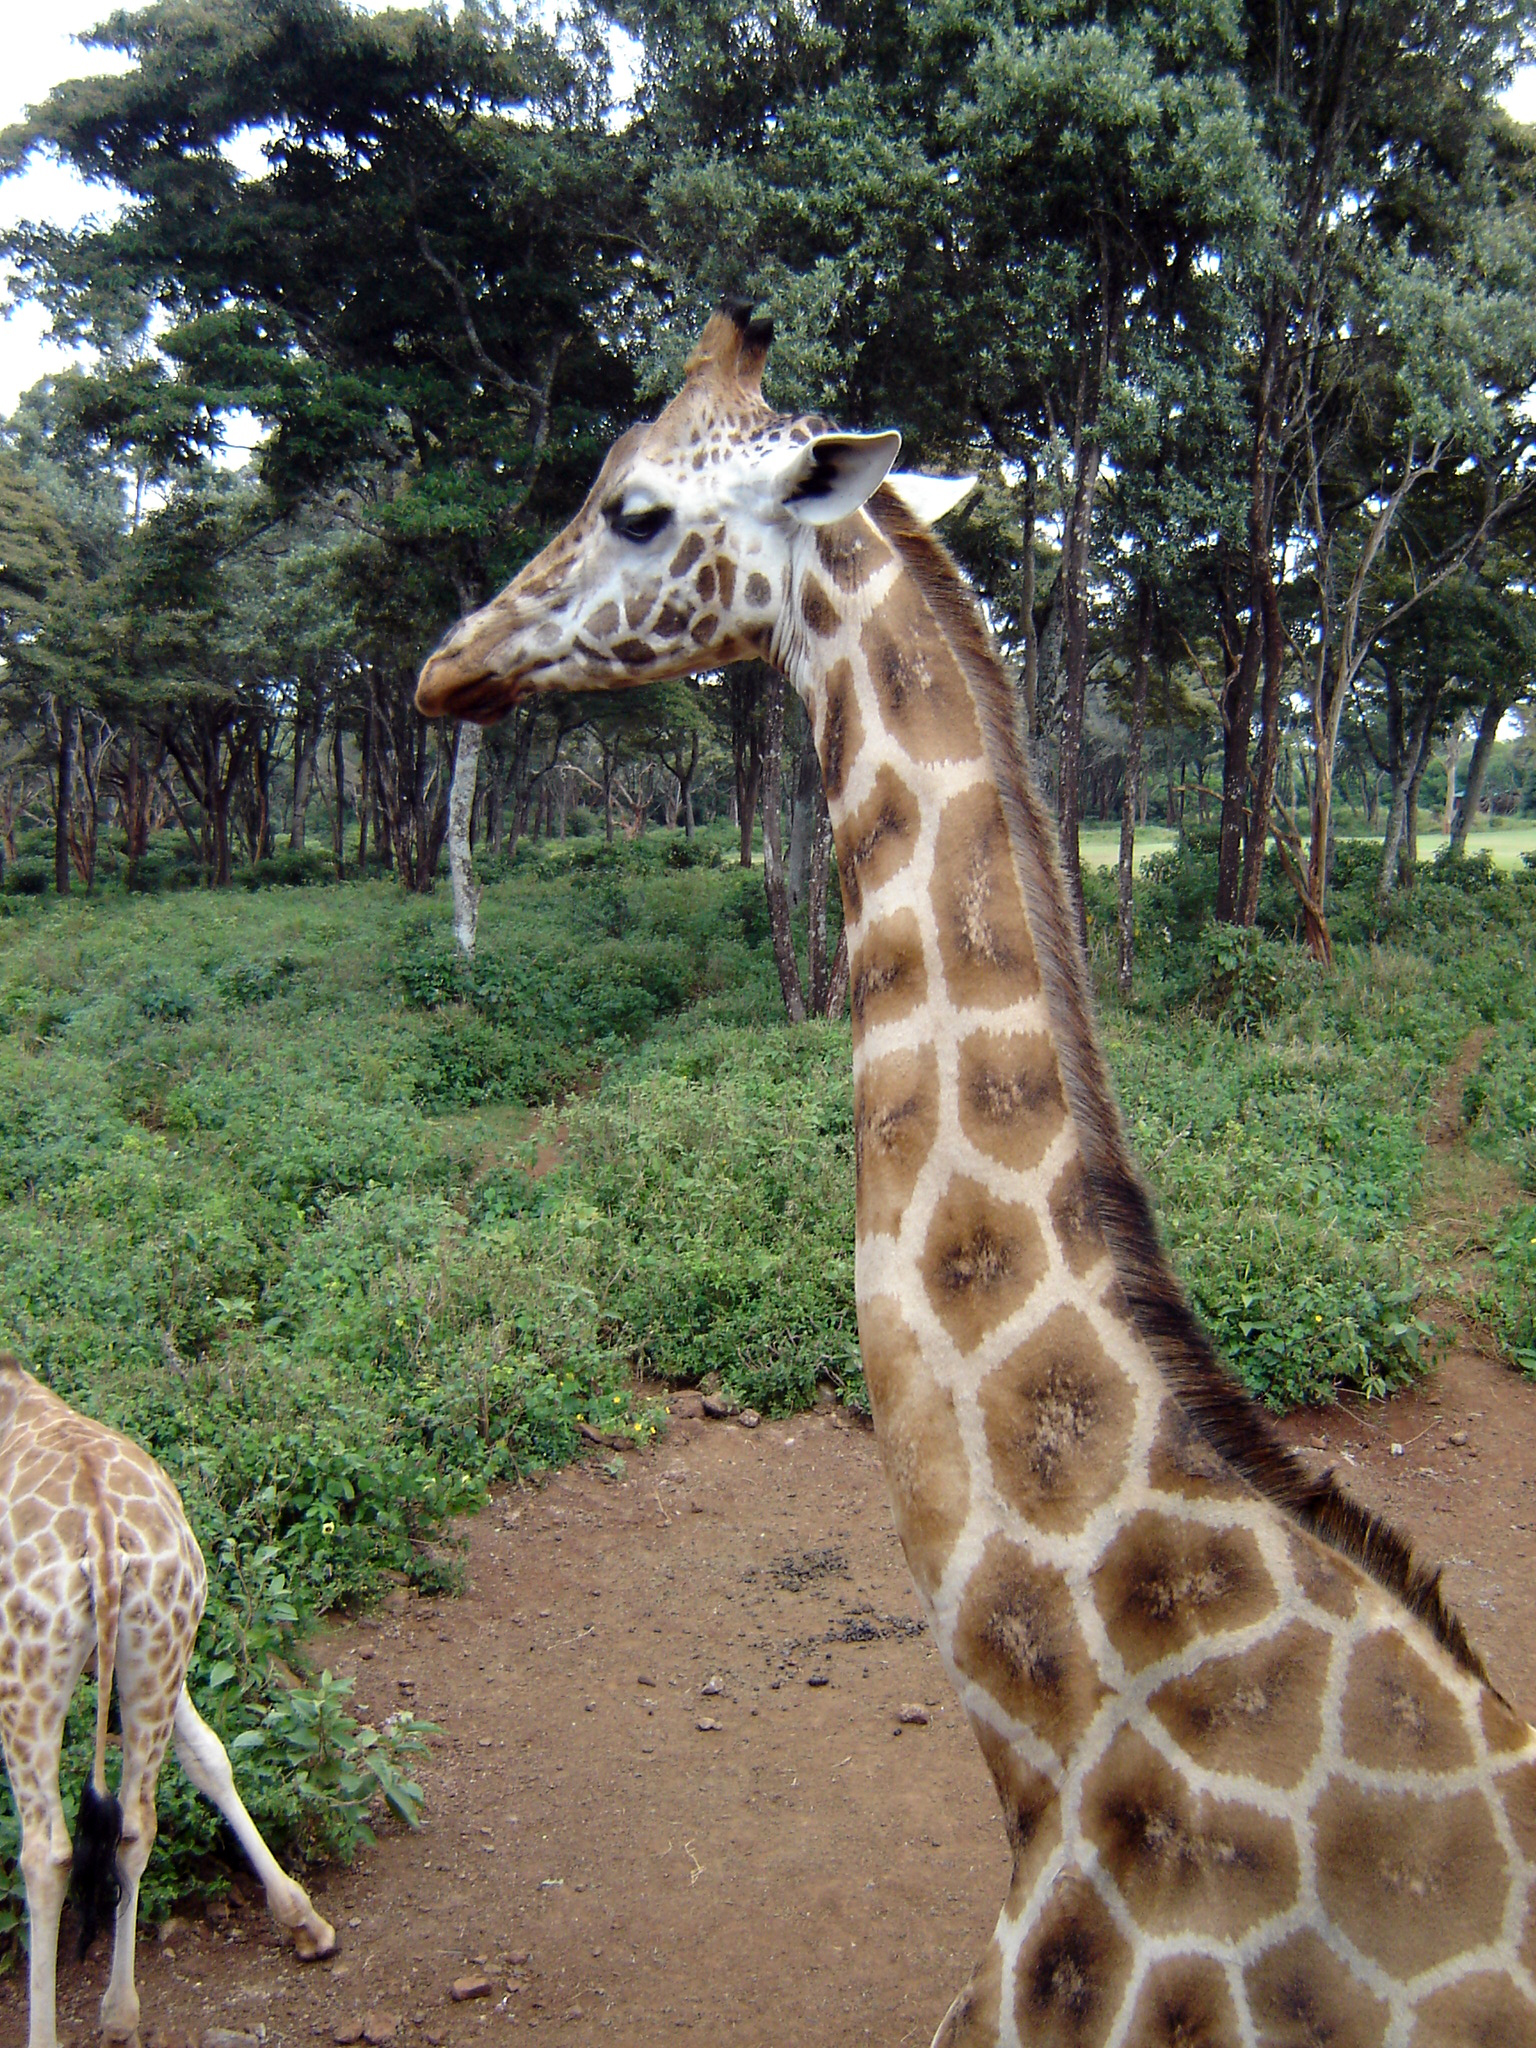 two giraffes standing near each other in an enclosed area